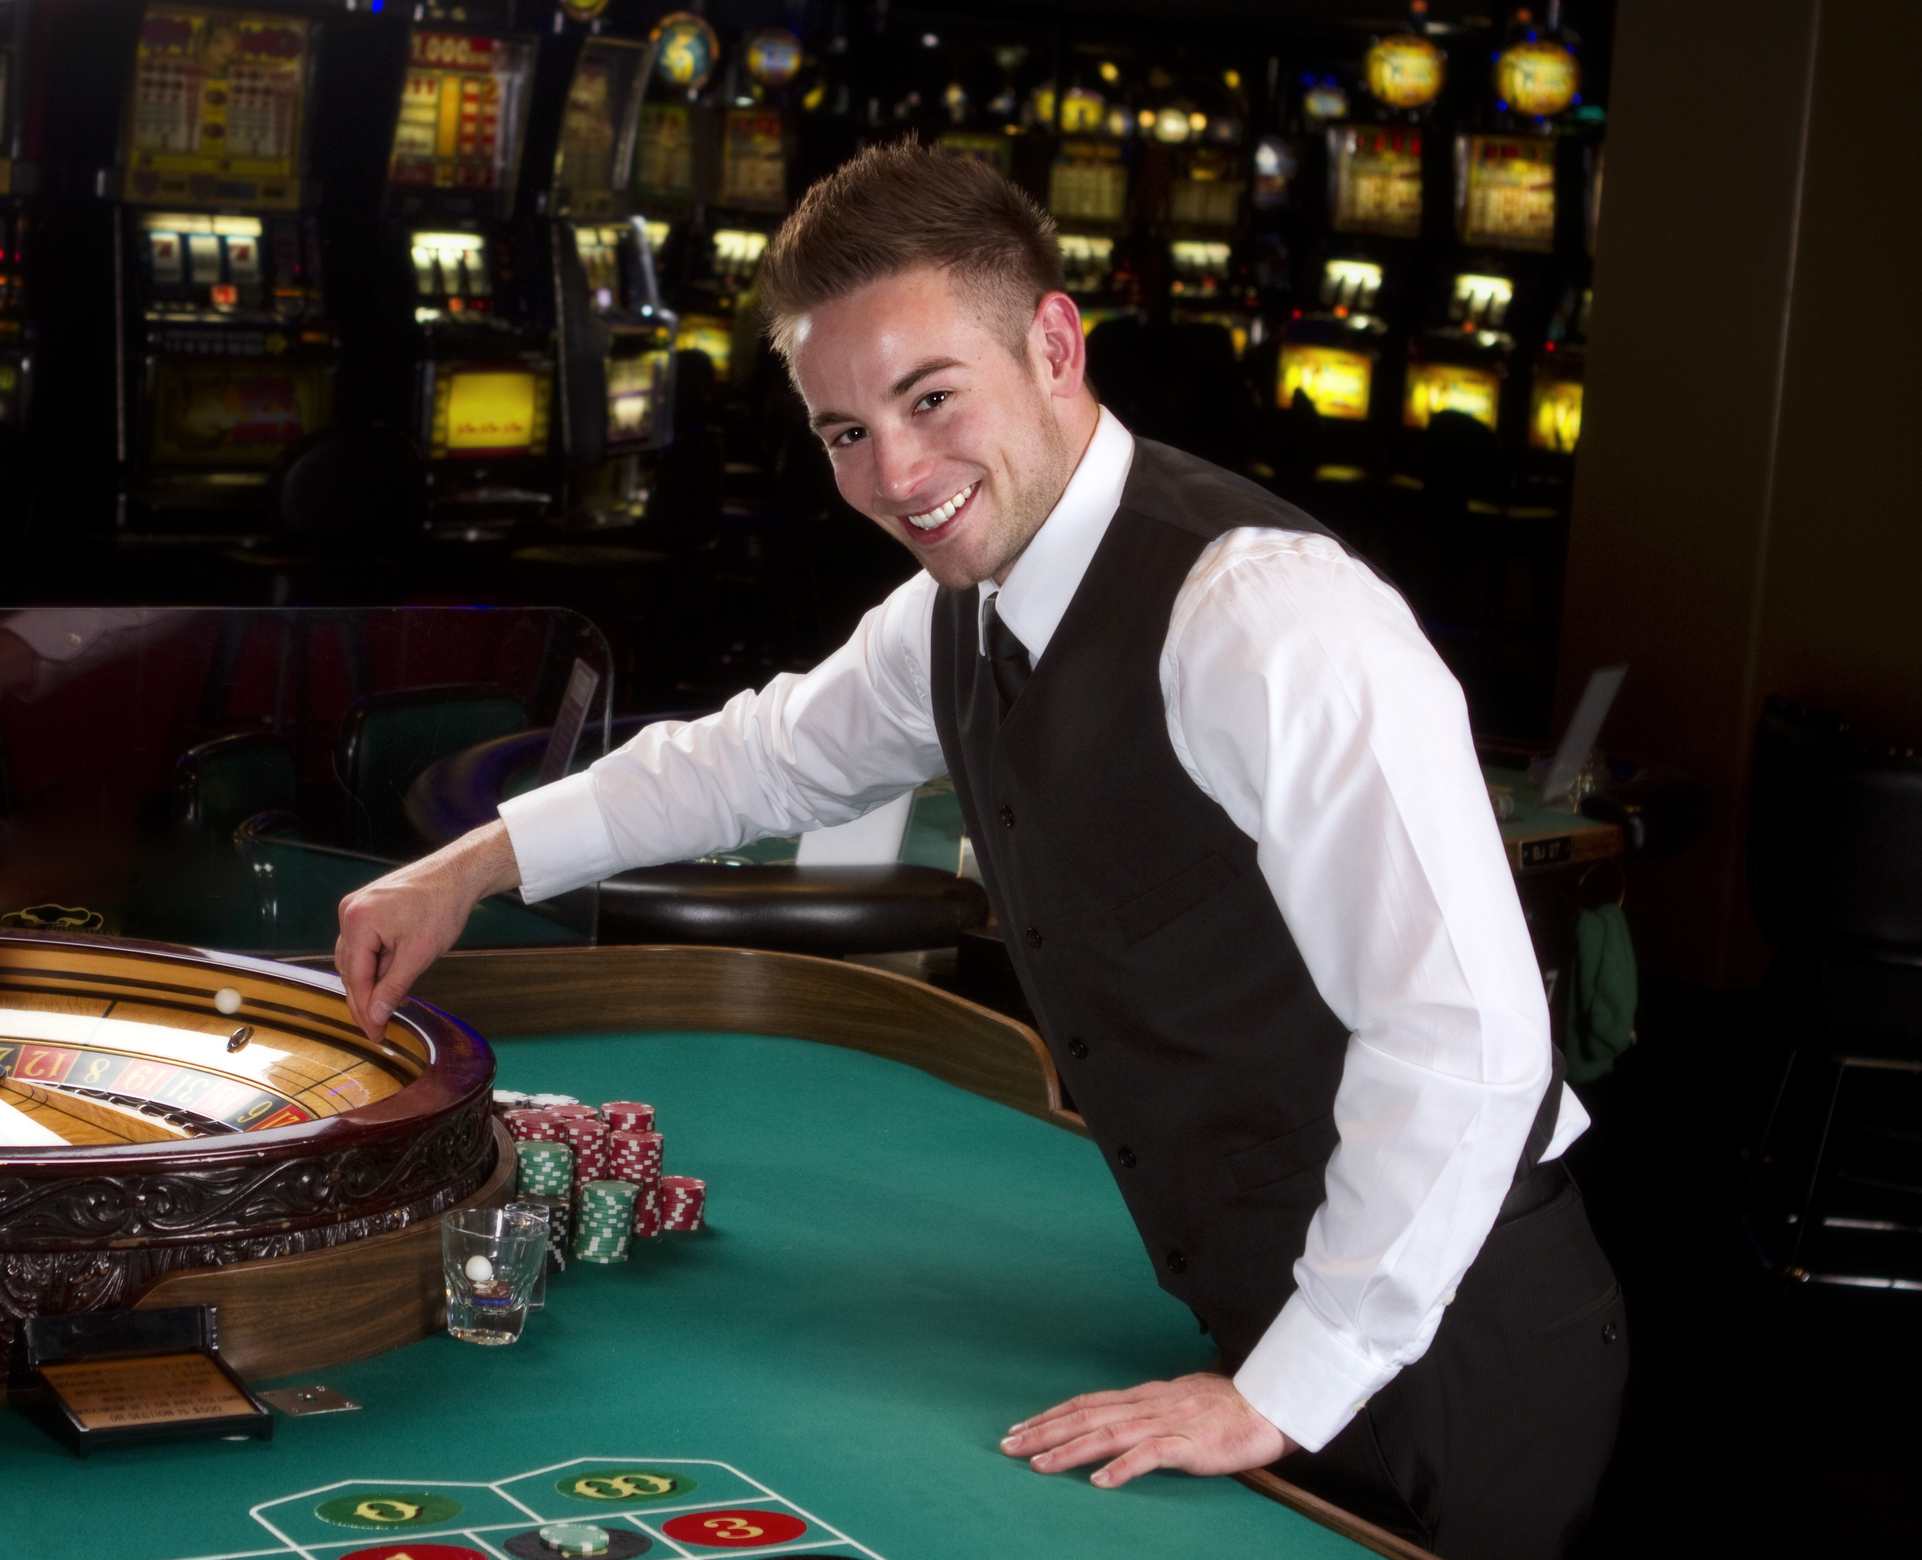 Slots 101: Online Gaming Rules To Follow